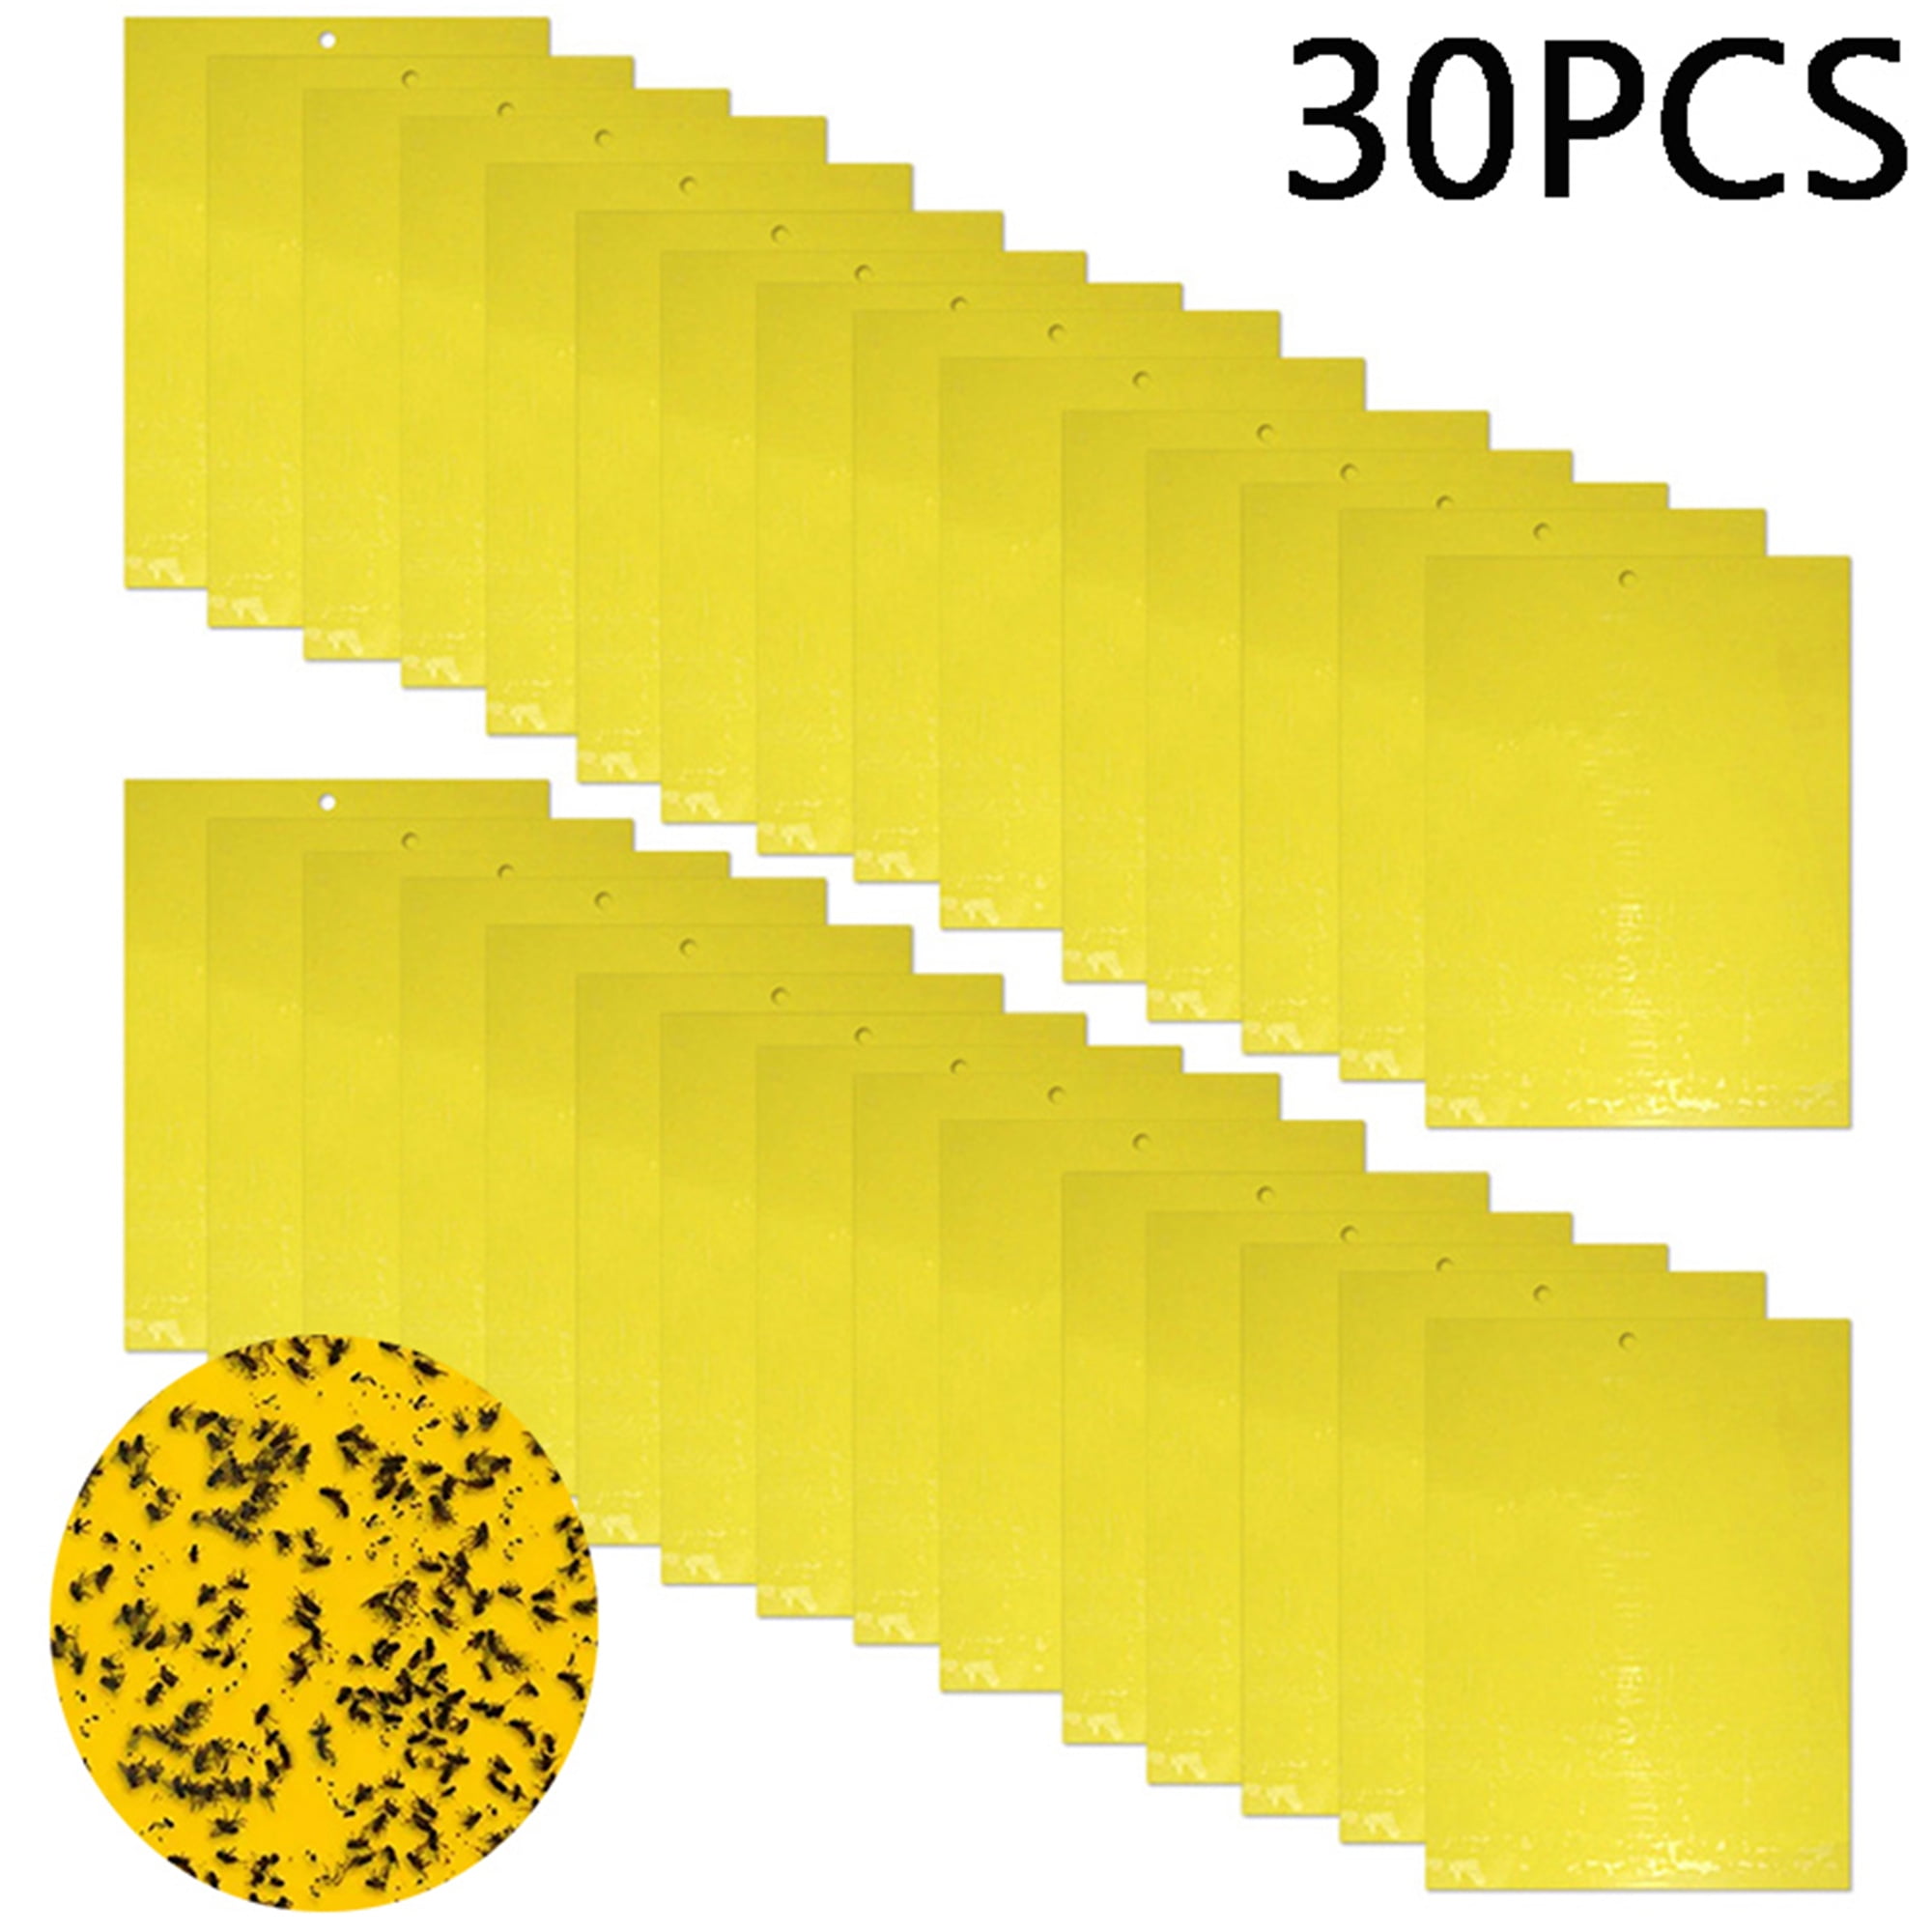 Extra-Wide Sticky Fly Traps (Yellow) — 40 Pack